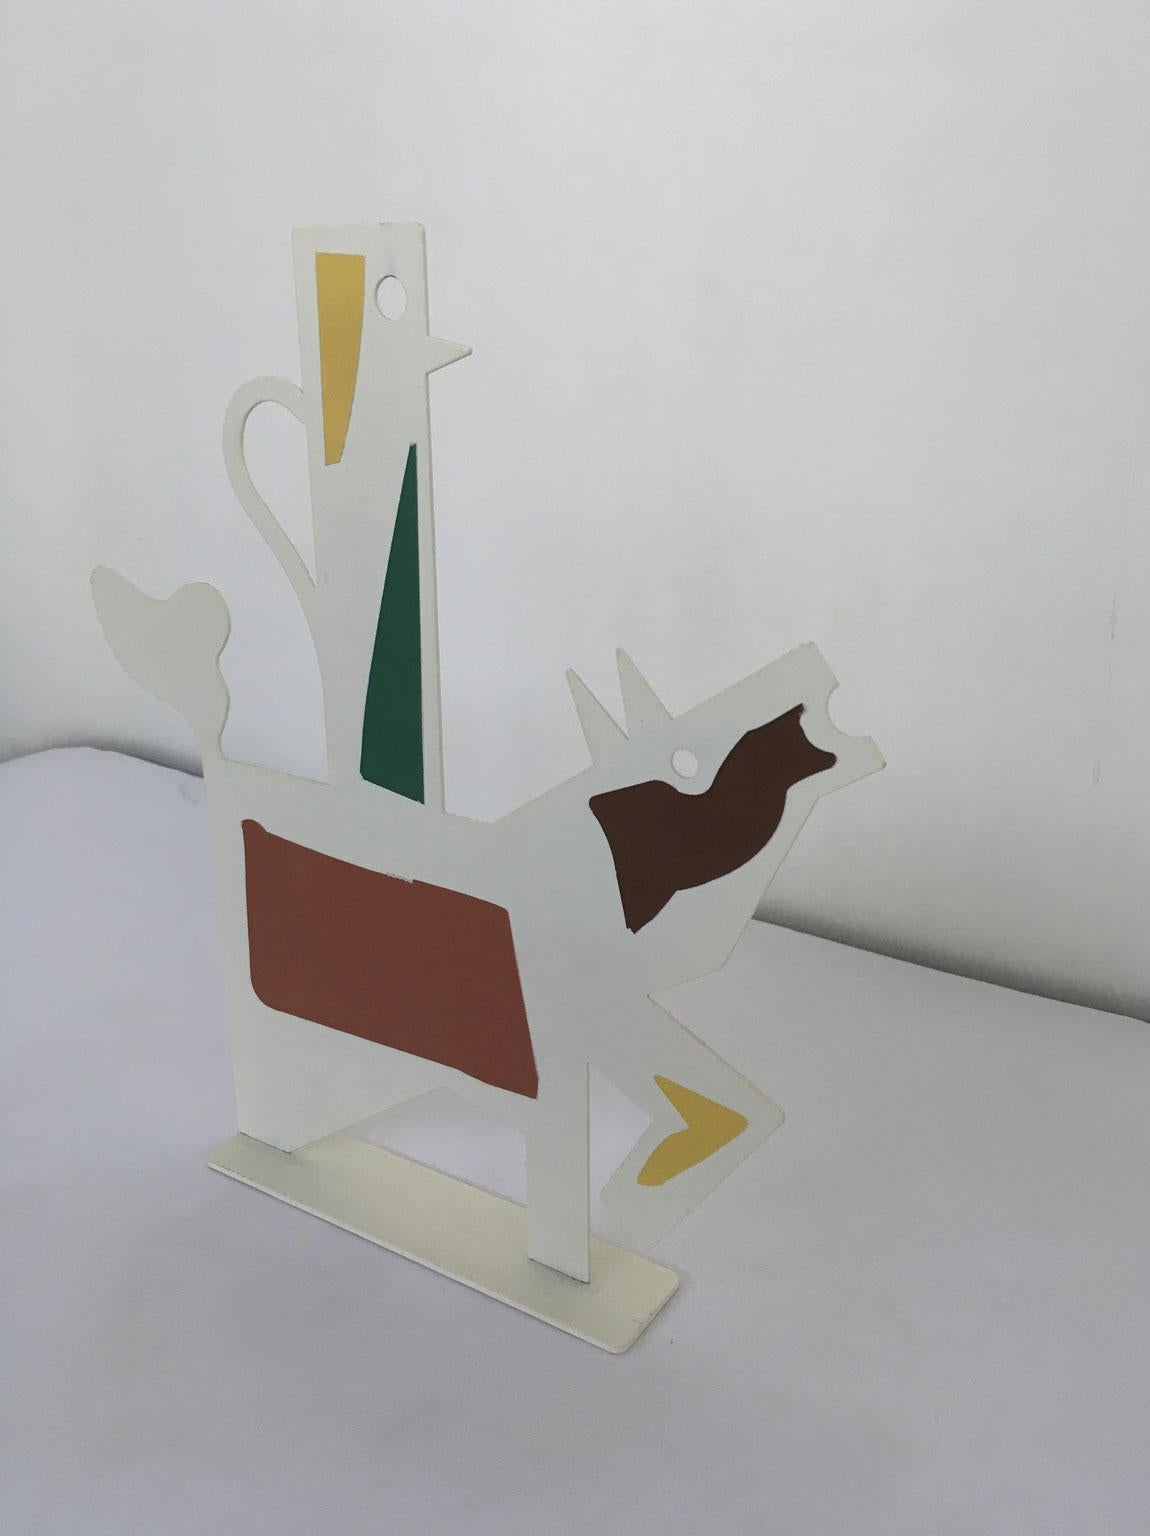 Italy 1980 Riccardo Dalisi White Painted Metal Sculpture Muccacaffè For Sale 4